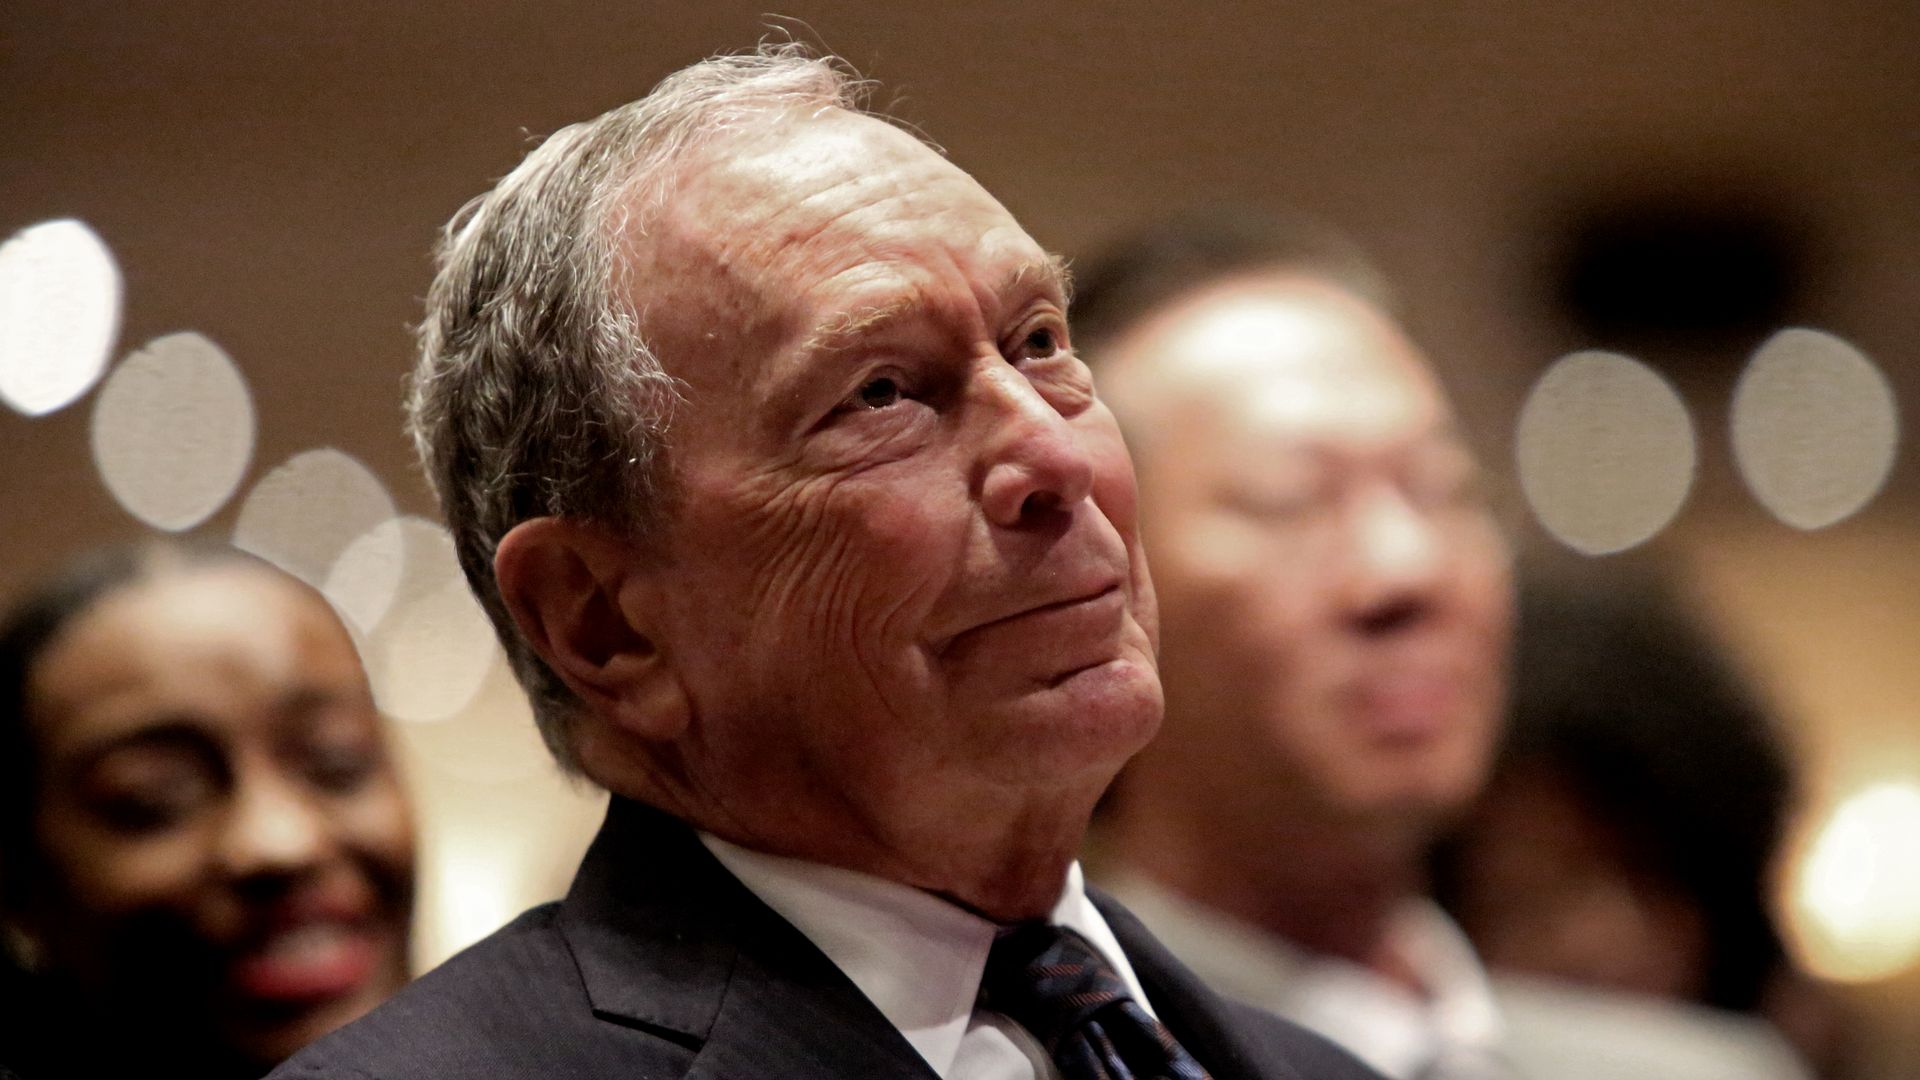 Michael Bloomberg prepares to speak at the Christian Cultural Center 